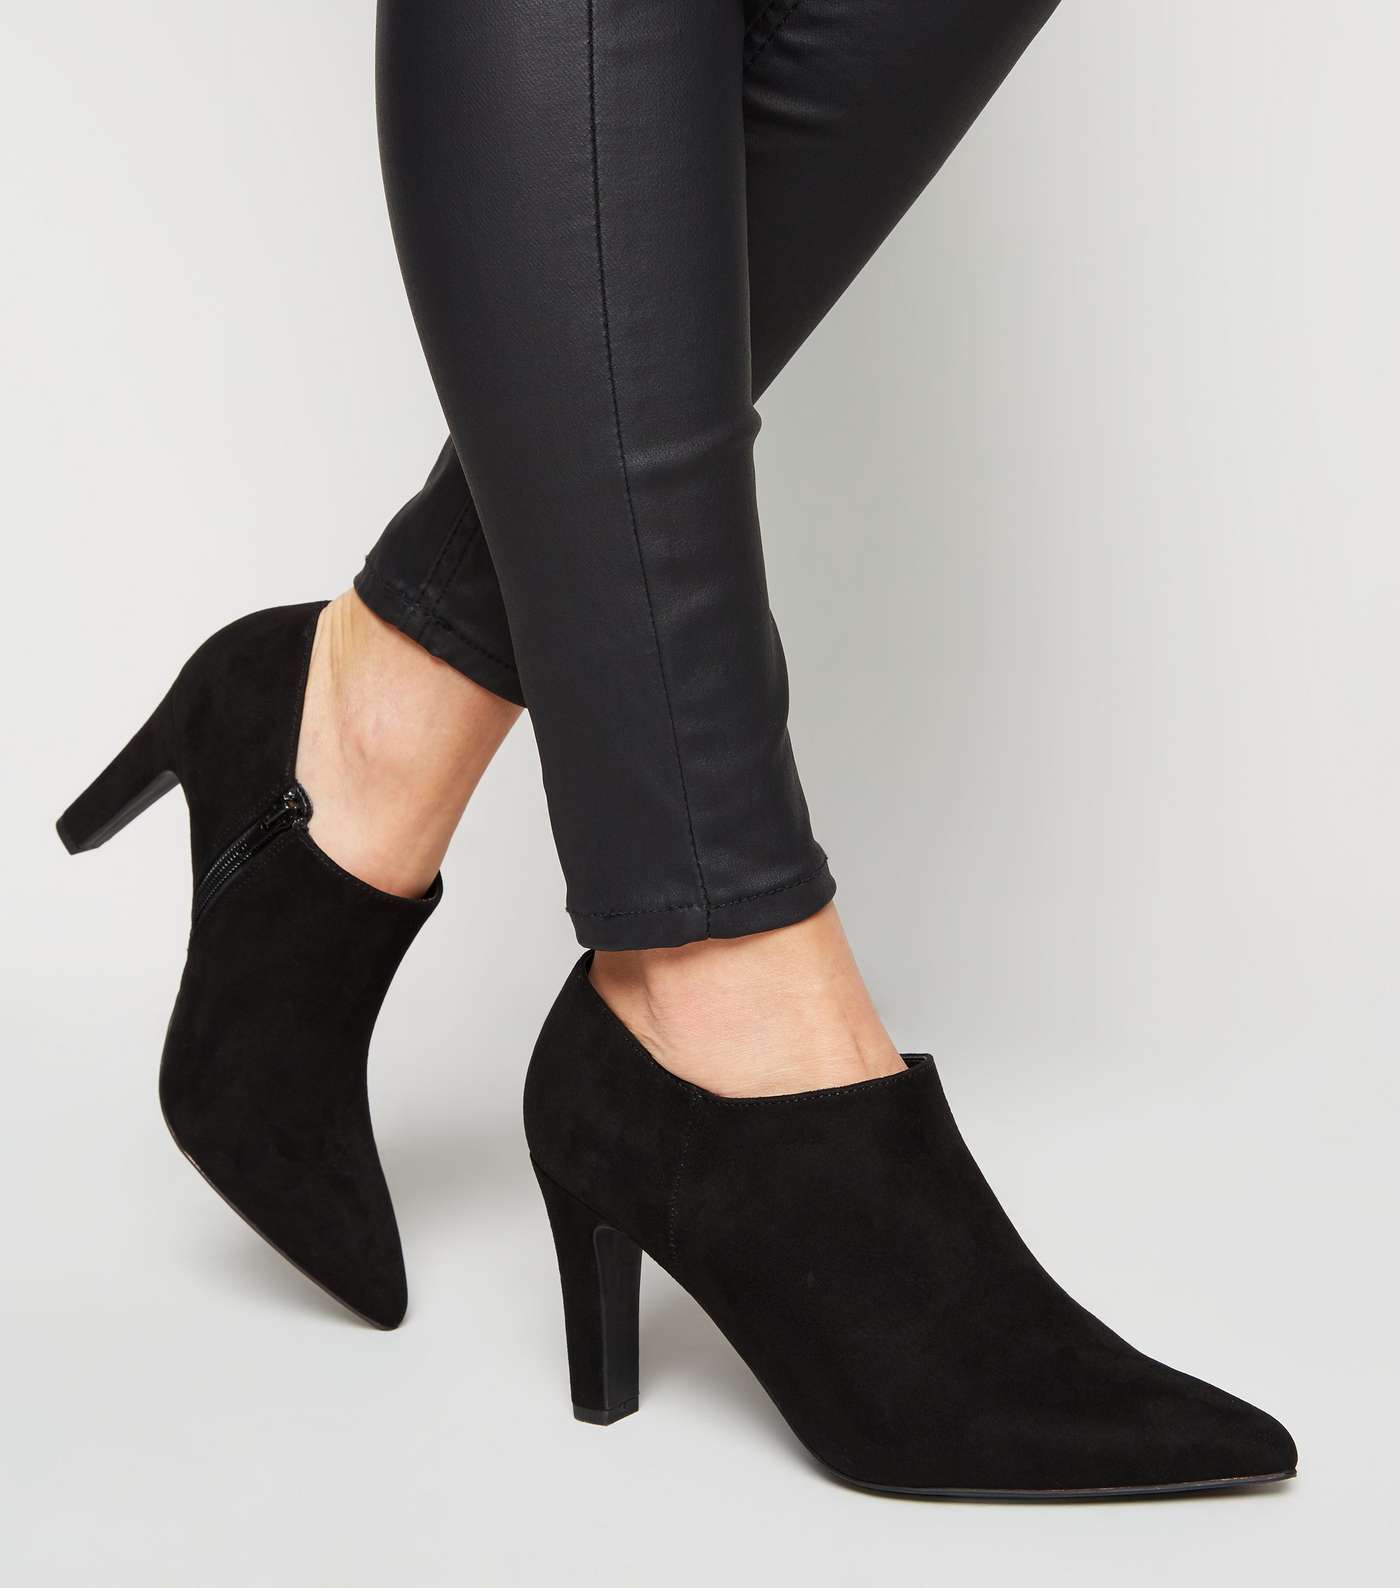 Black Suedette Pointed Toe Heeled Shoe Boots Image 2